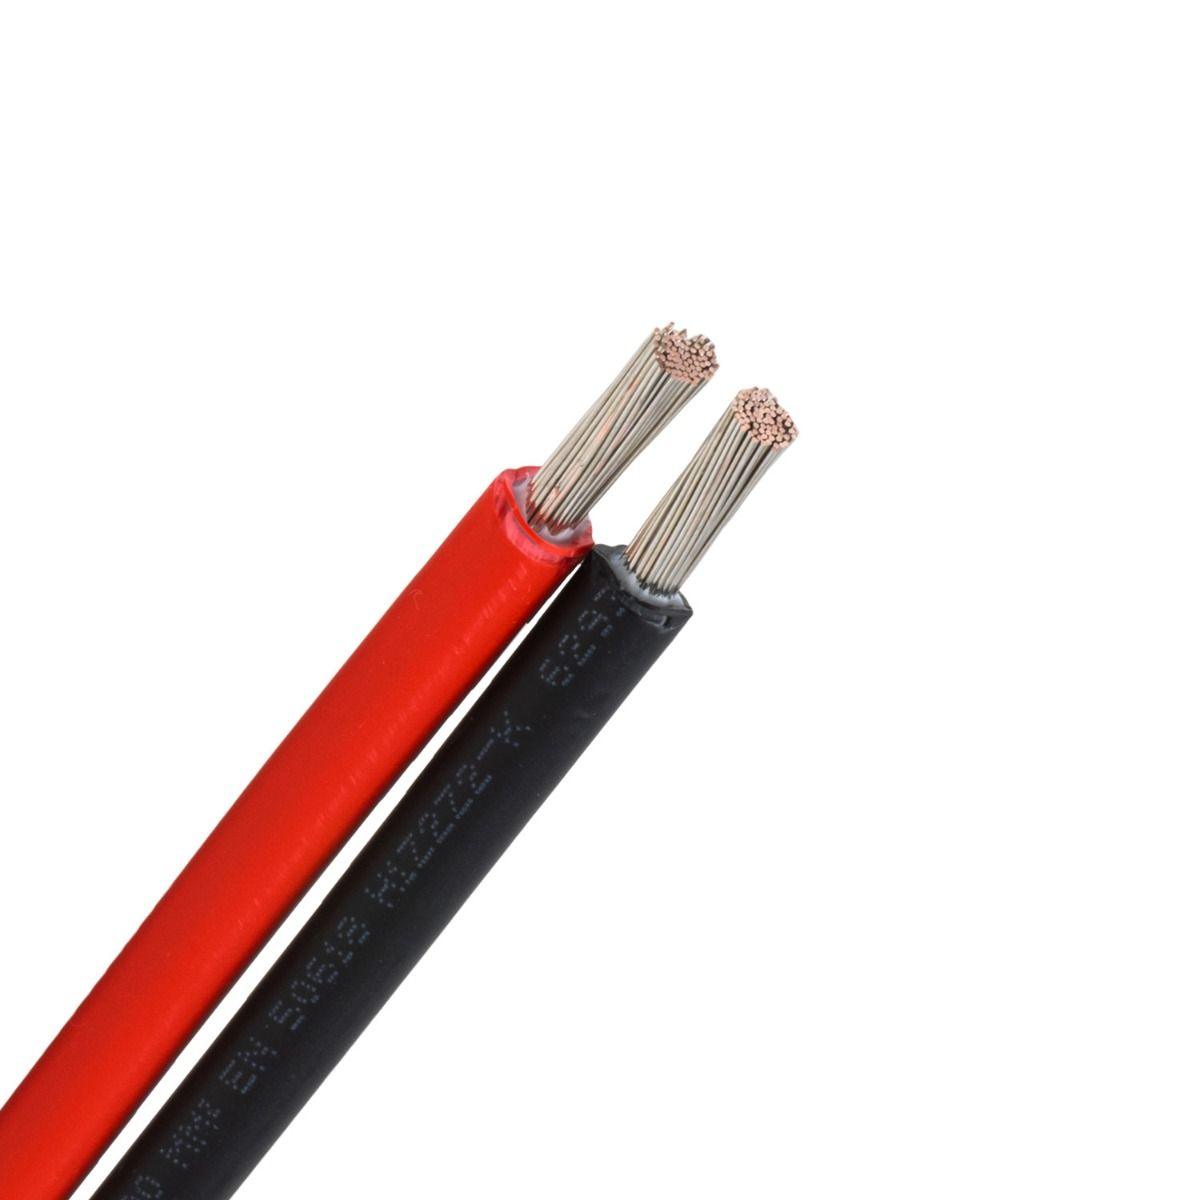 10m to 100m Solar PV Cable 10mm². Pair of Red and Black - VoltaconSolar